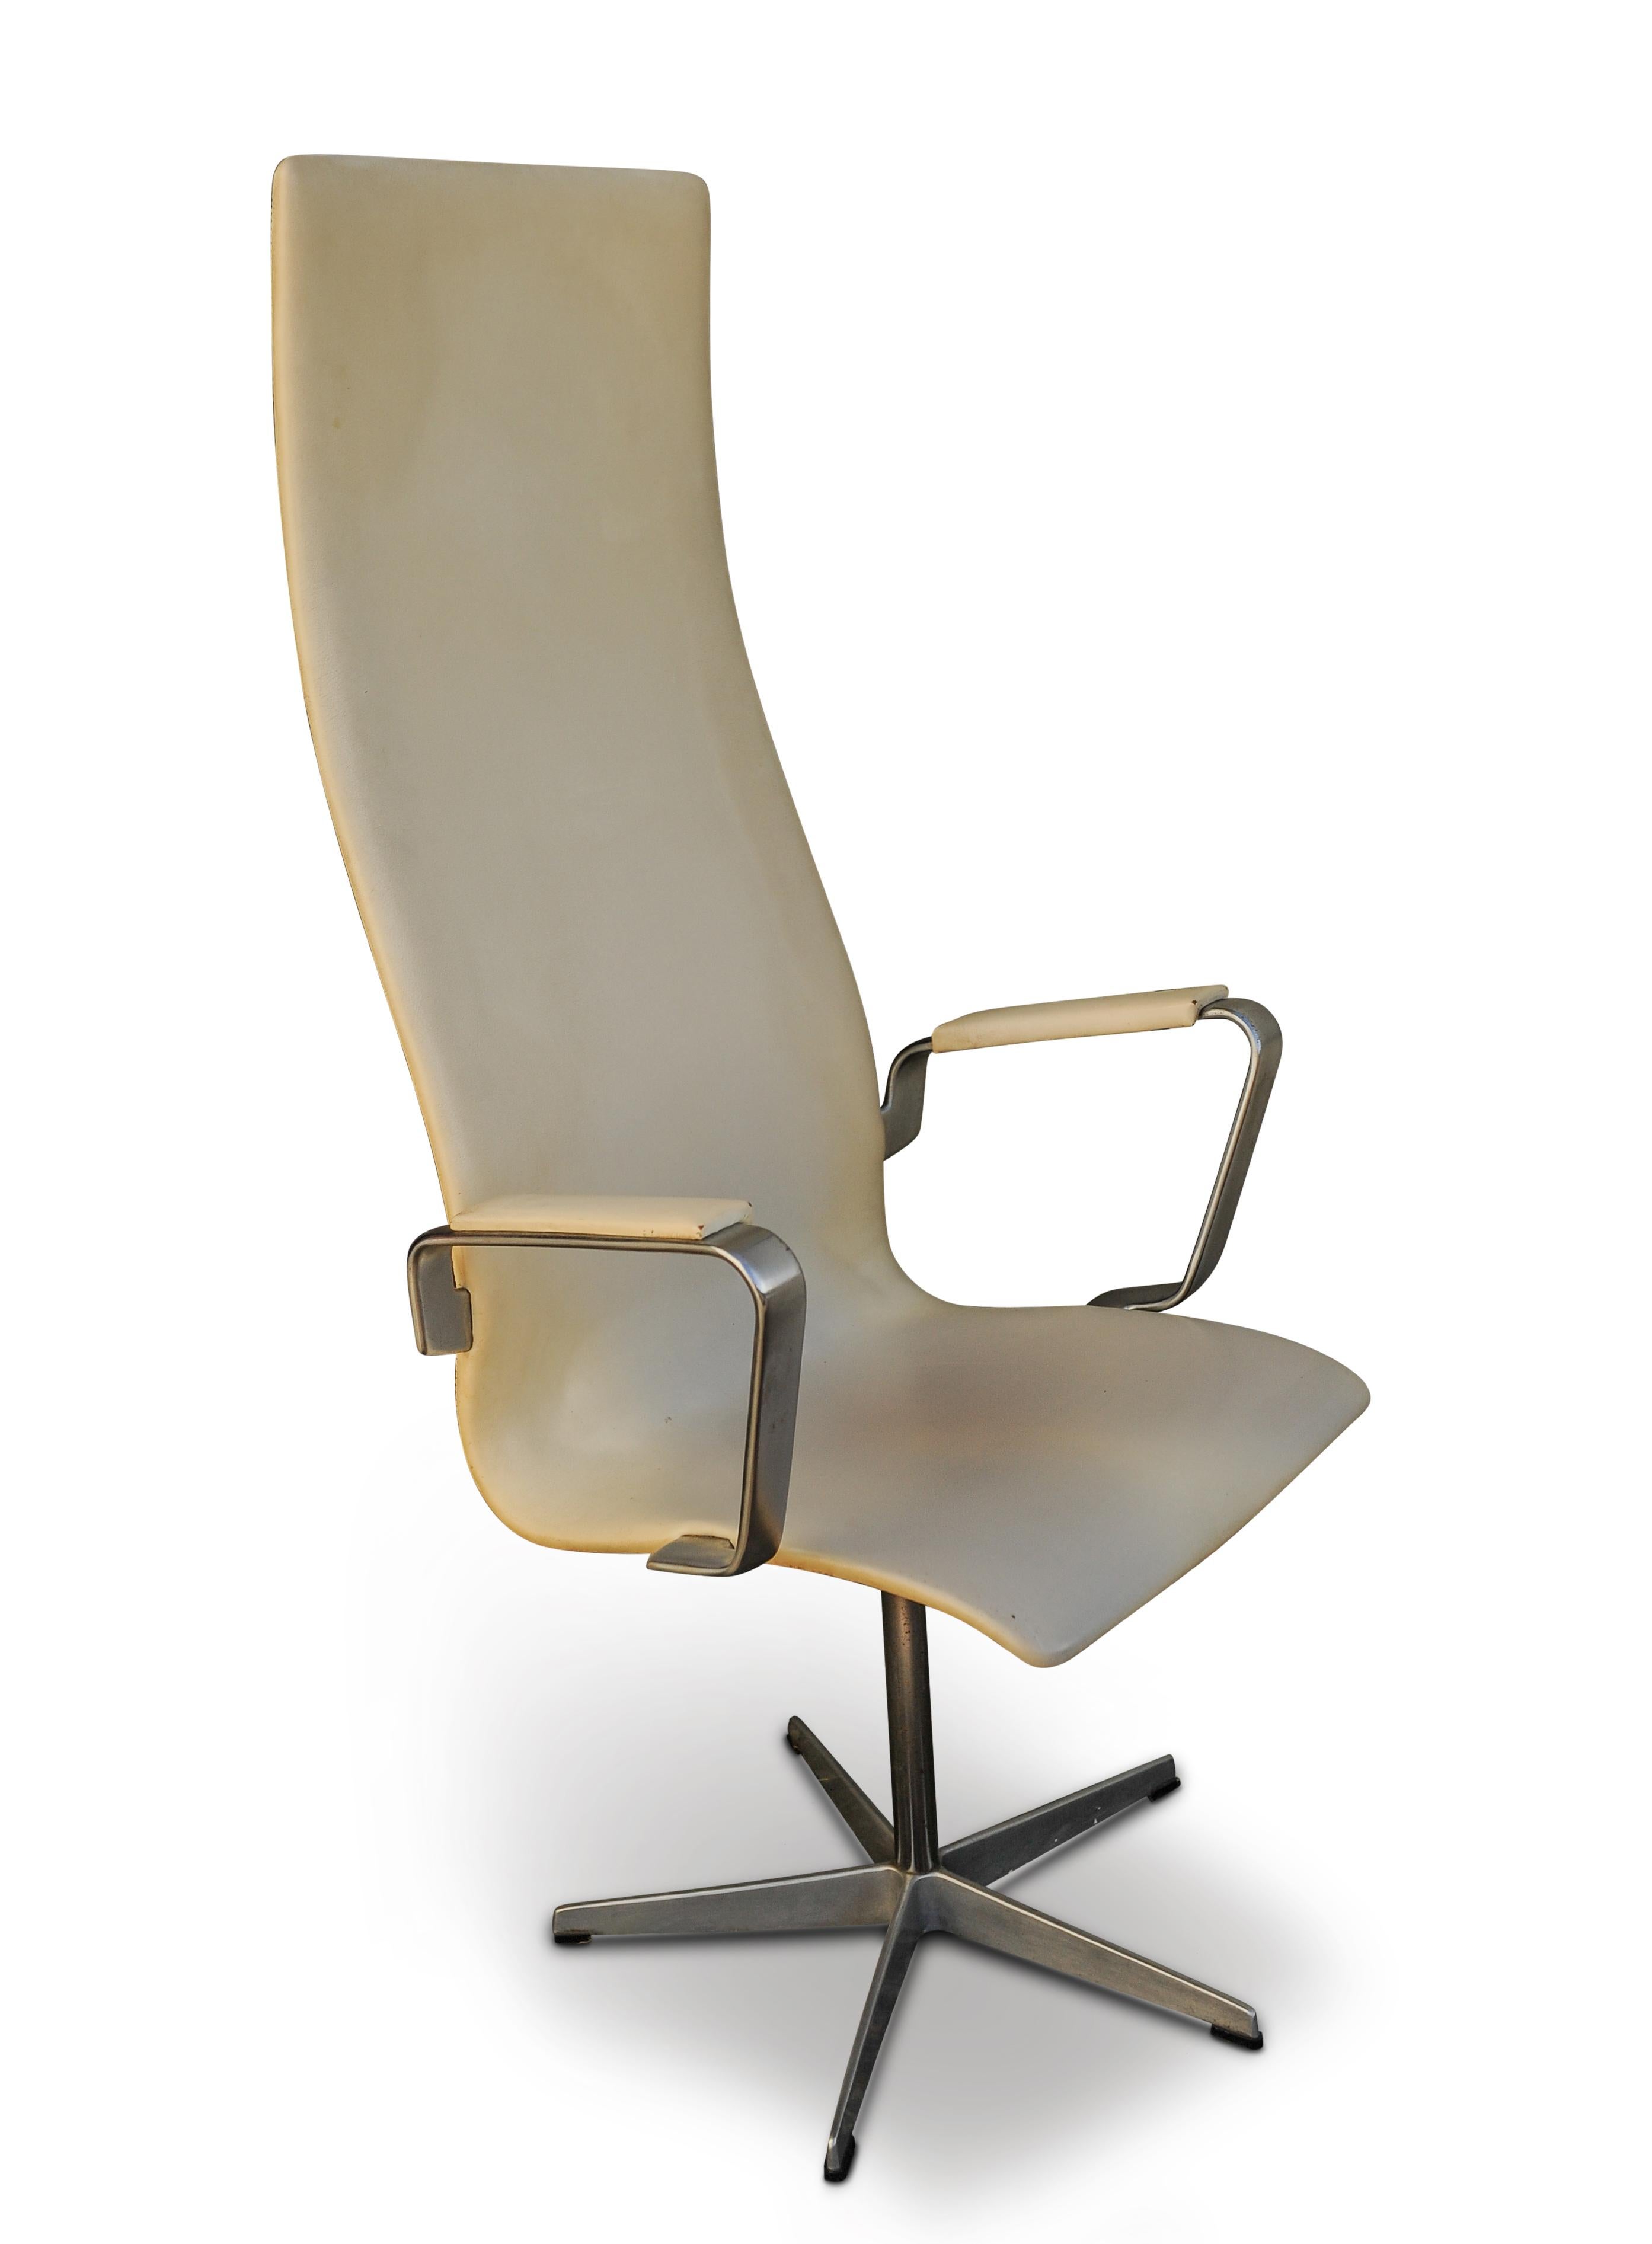 Original Design by Arne Jacobsen (1902-1971) for Fritz Hansen.
An original off-white leather and brushed aluminium framed swivel Oxford chair, having cream leather padded upholstery, raised on five-spoke base, labelled to underside.

Stamped and